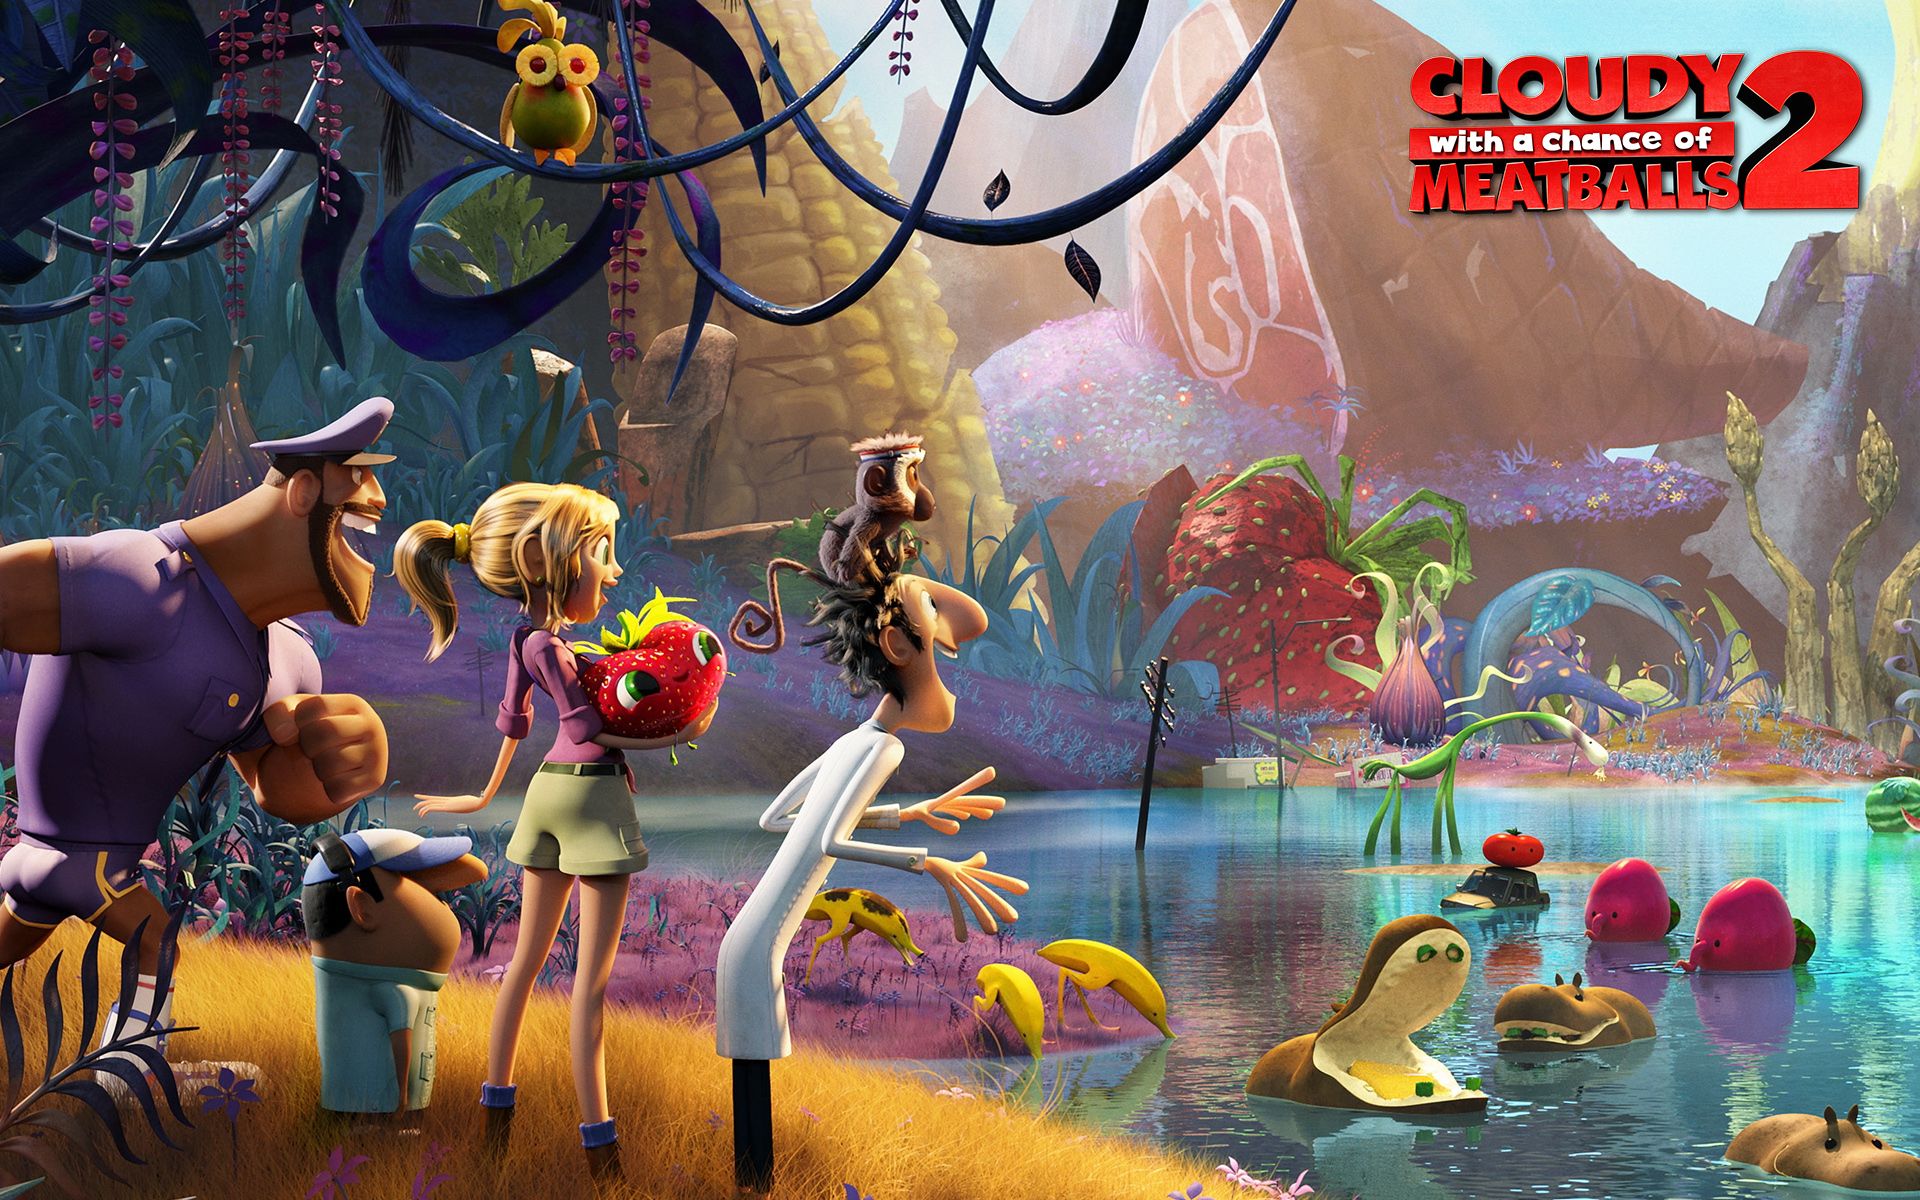 HD wallpaper, With, Of, Cloudy, 2, A, Chance, Meatballs